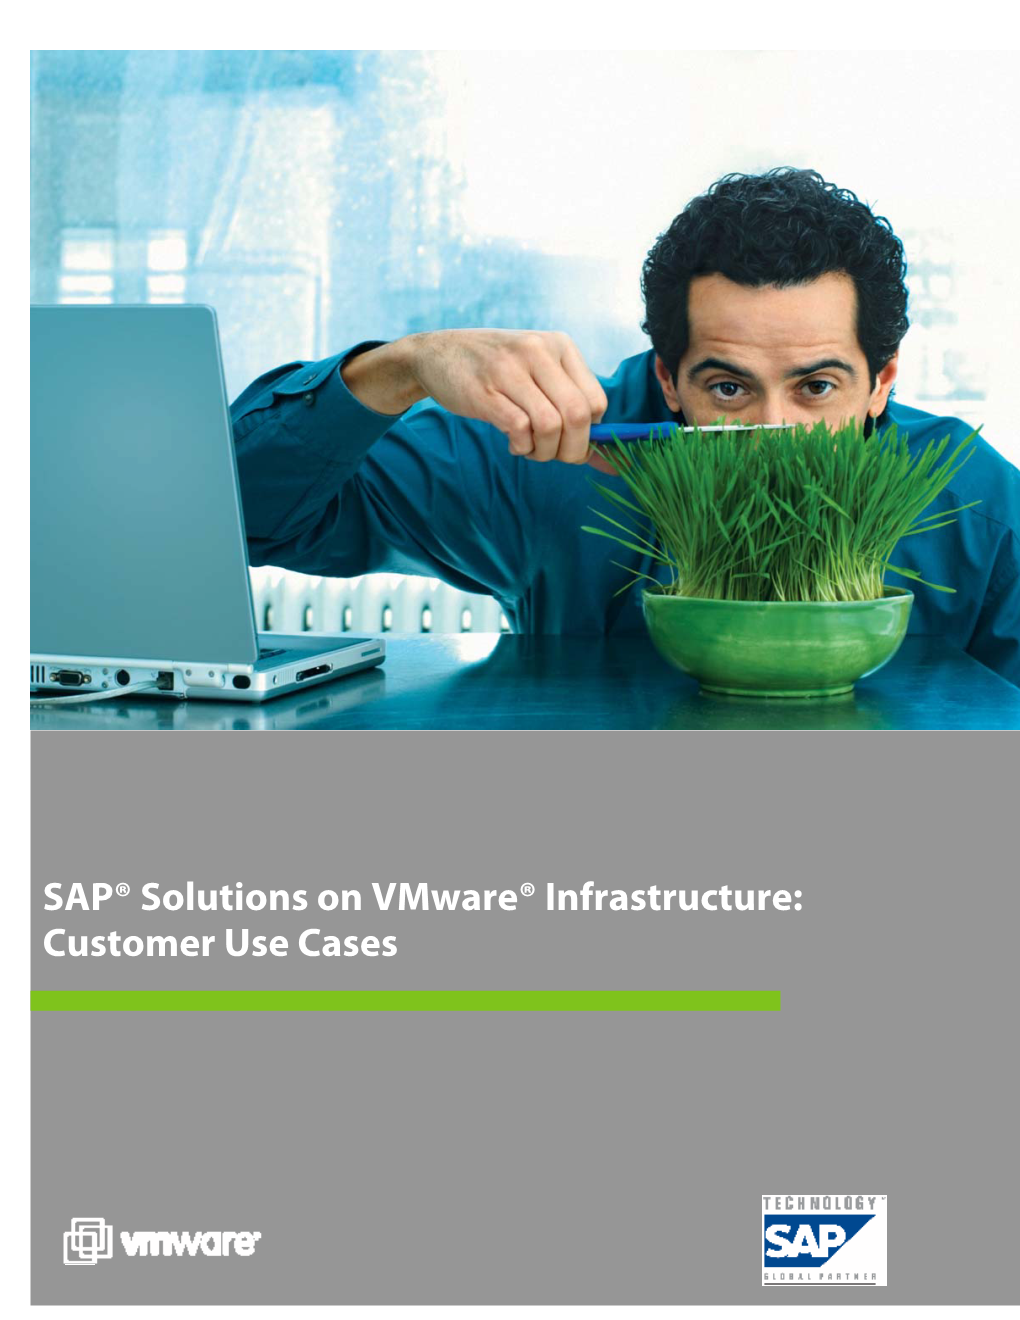 SAP® Solutions on Vmware® Infrastructure: Customer Use Cases